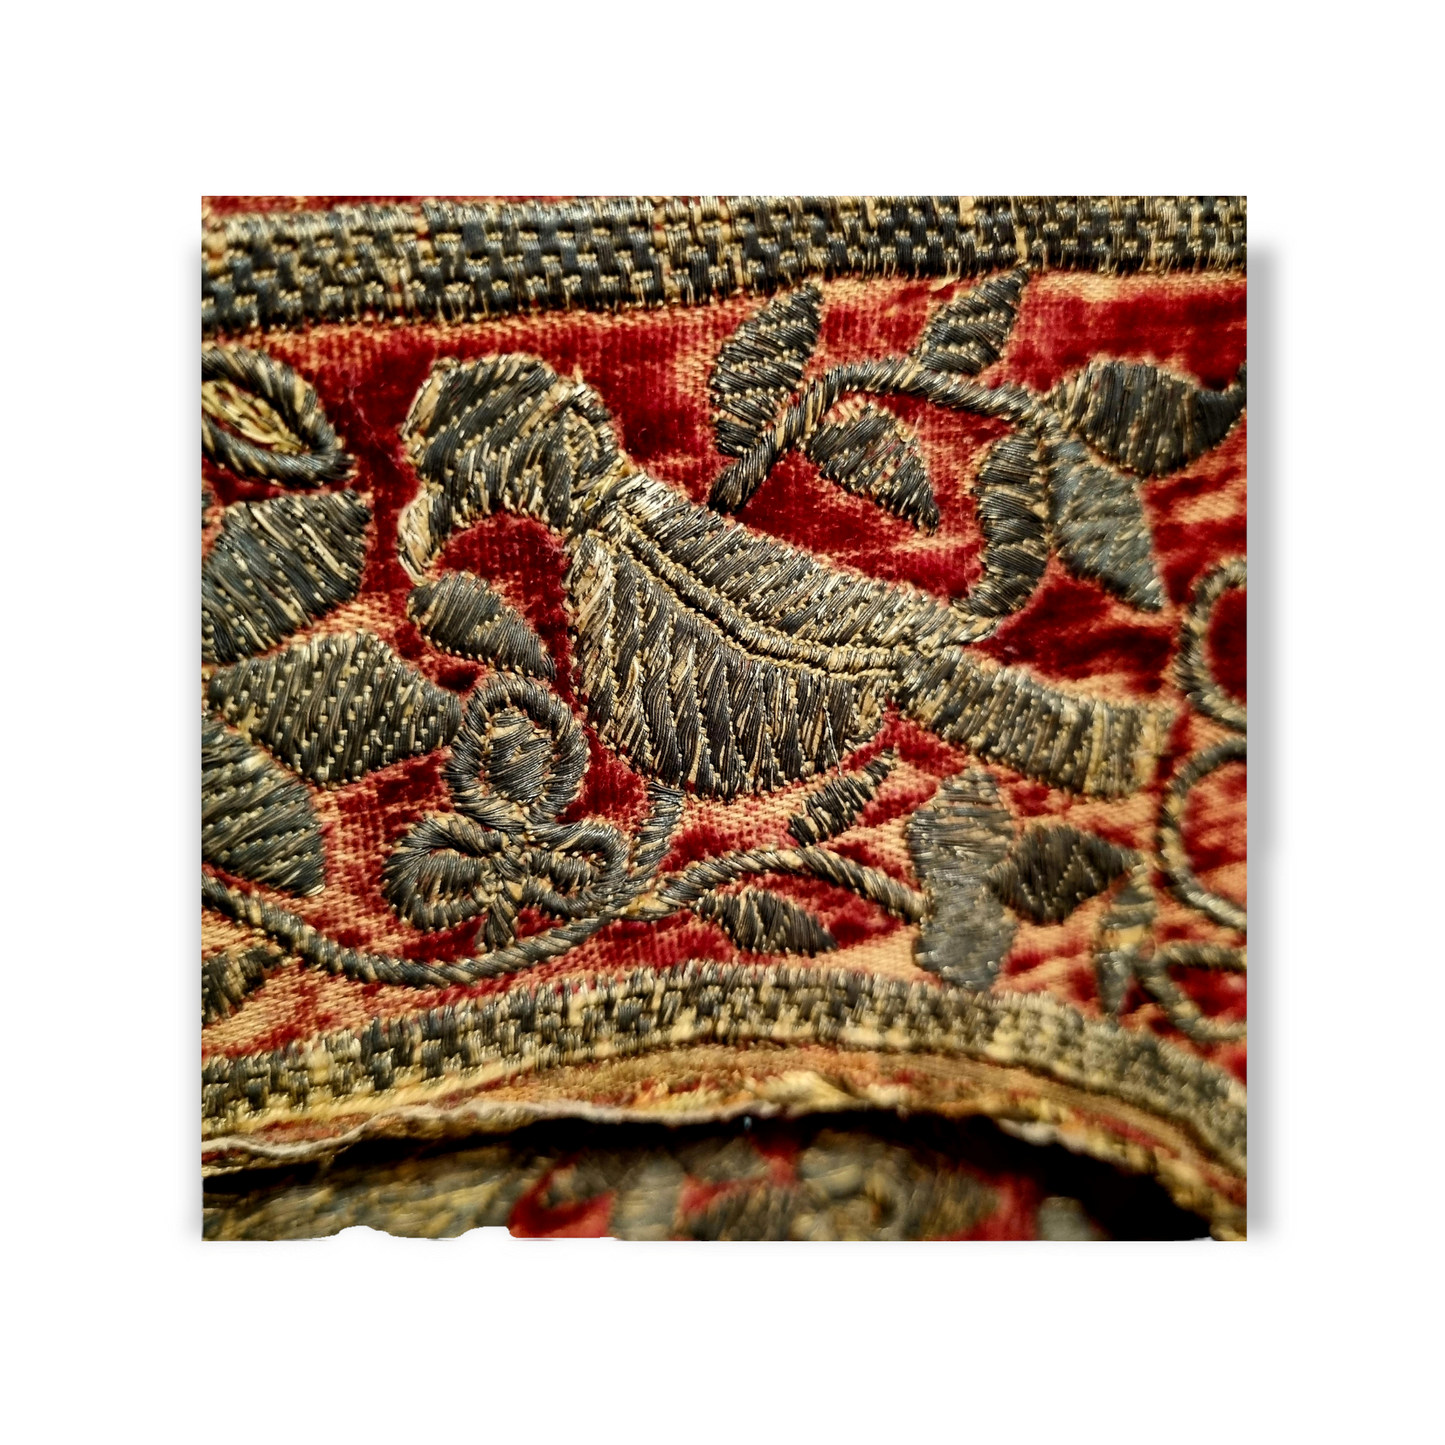 Early 17th Century Spanish Antique Embroidered Velvet Box